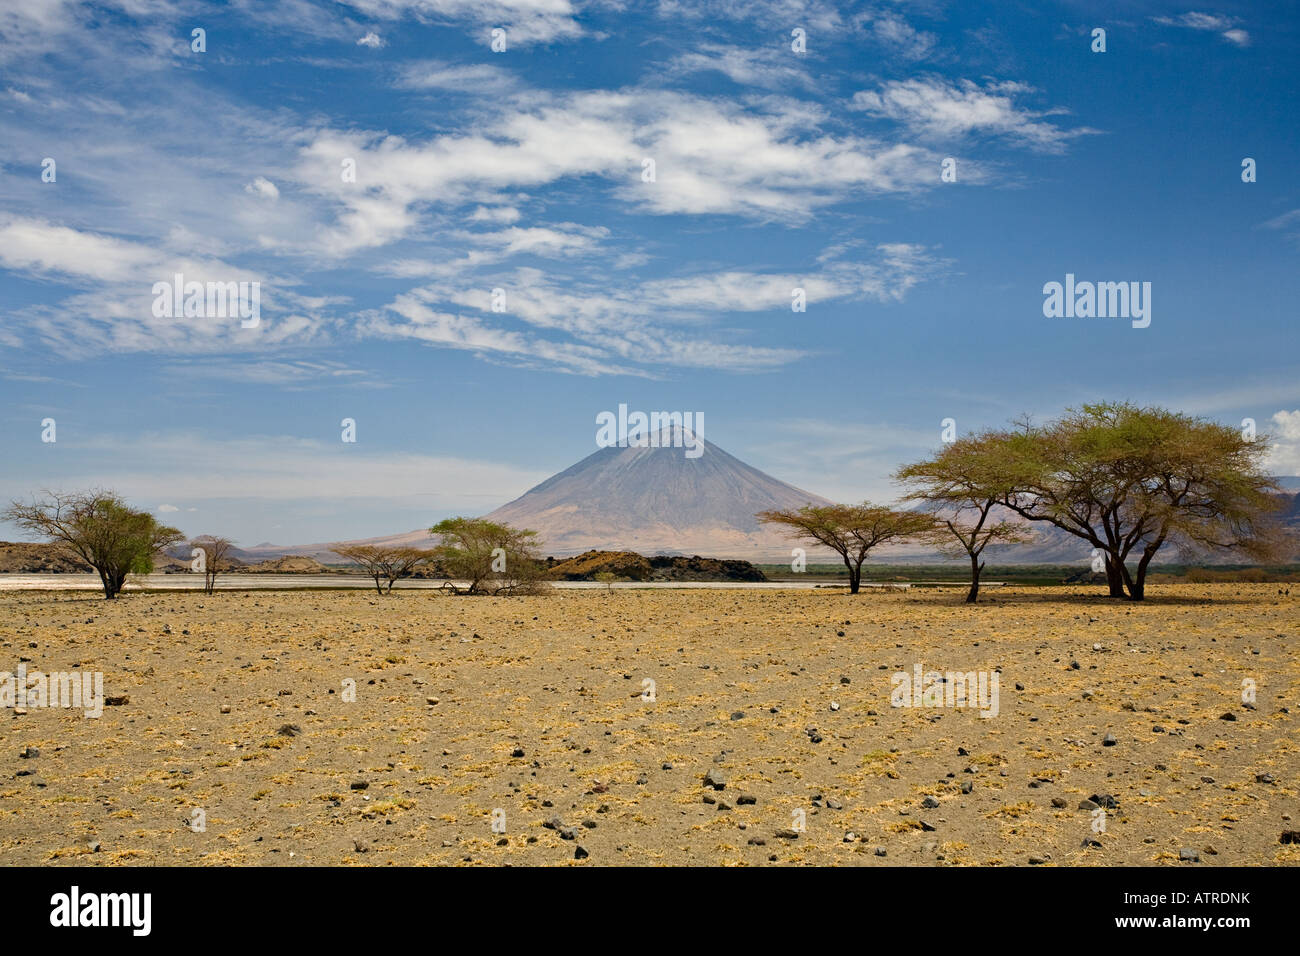 Ol' Doinyo Lengai volcano (Mountain of God) in a distance viewed from Lake Natron, Tanzania, Africa Stock Photo